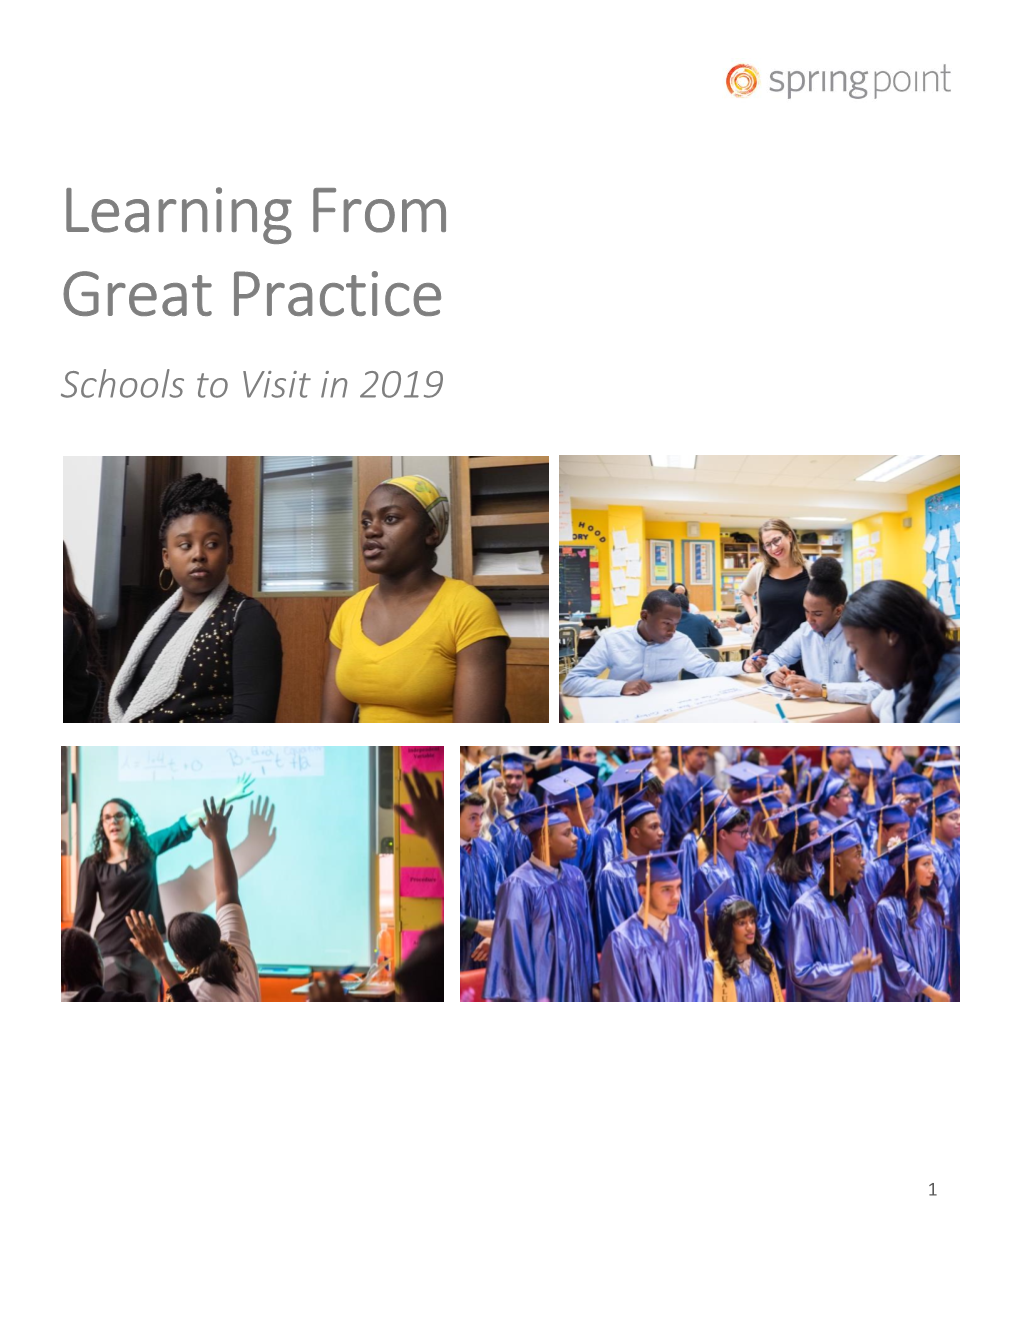 Learning Form Great Practice: Schools to Visit in 2019